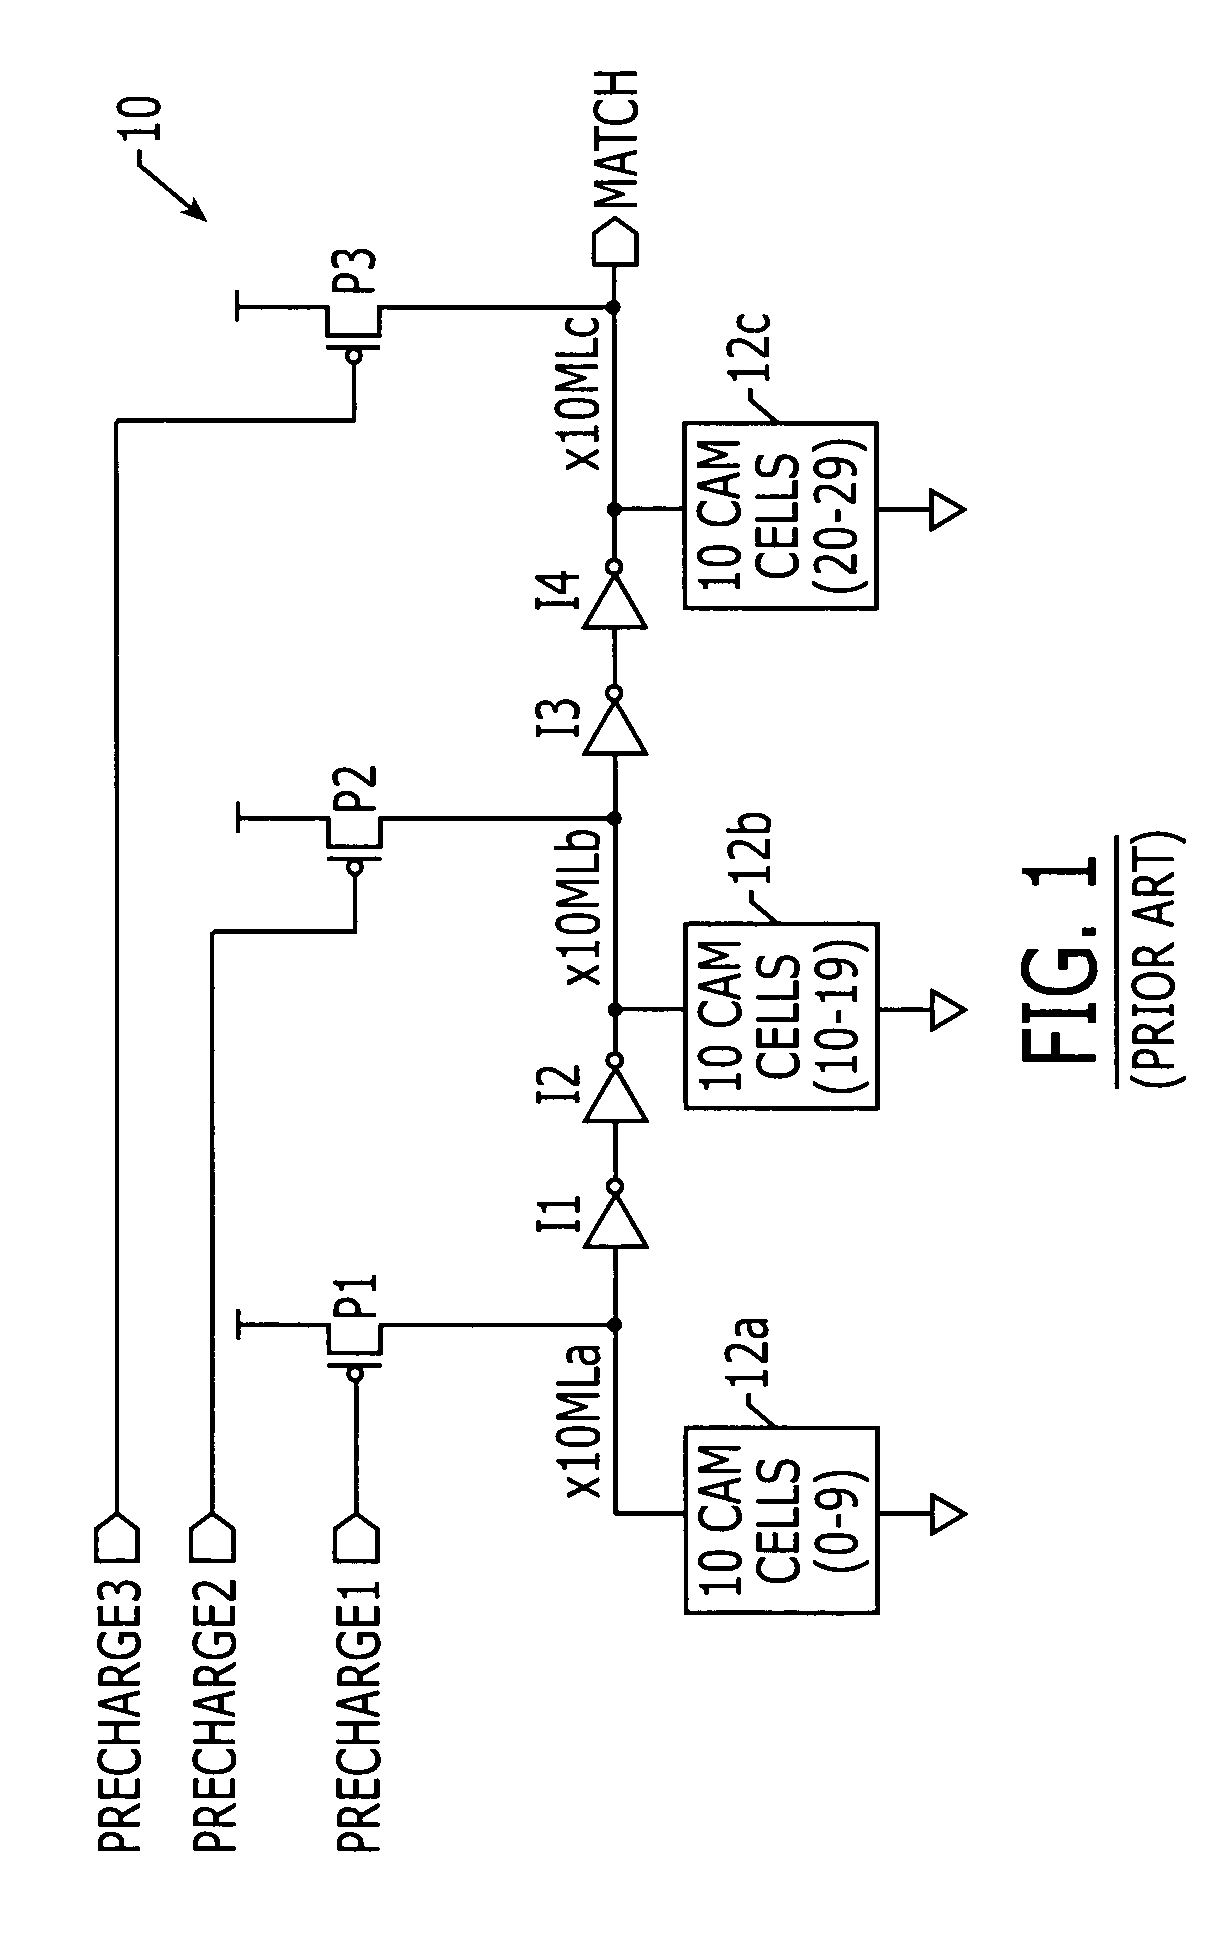 Content addressable memory (CAM) devices that utilize segmented match lines and word lines to support pipelined search and write operations and methods of operating same